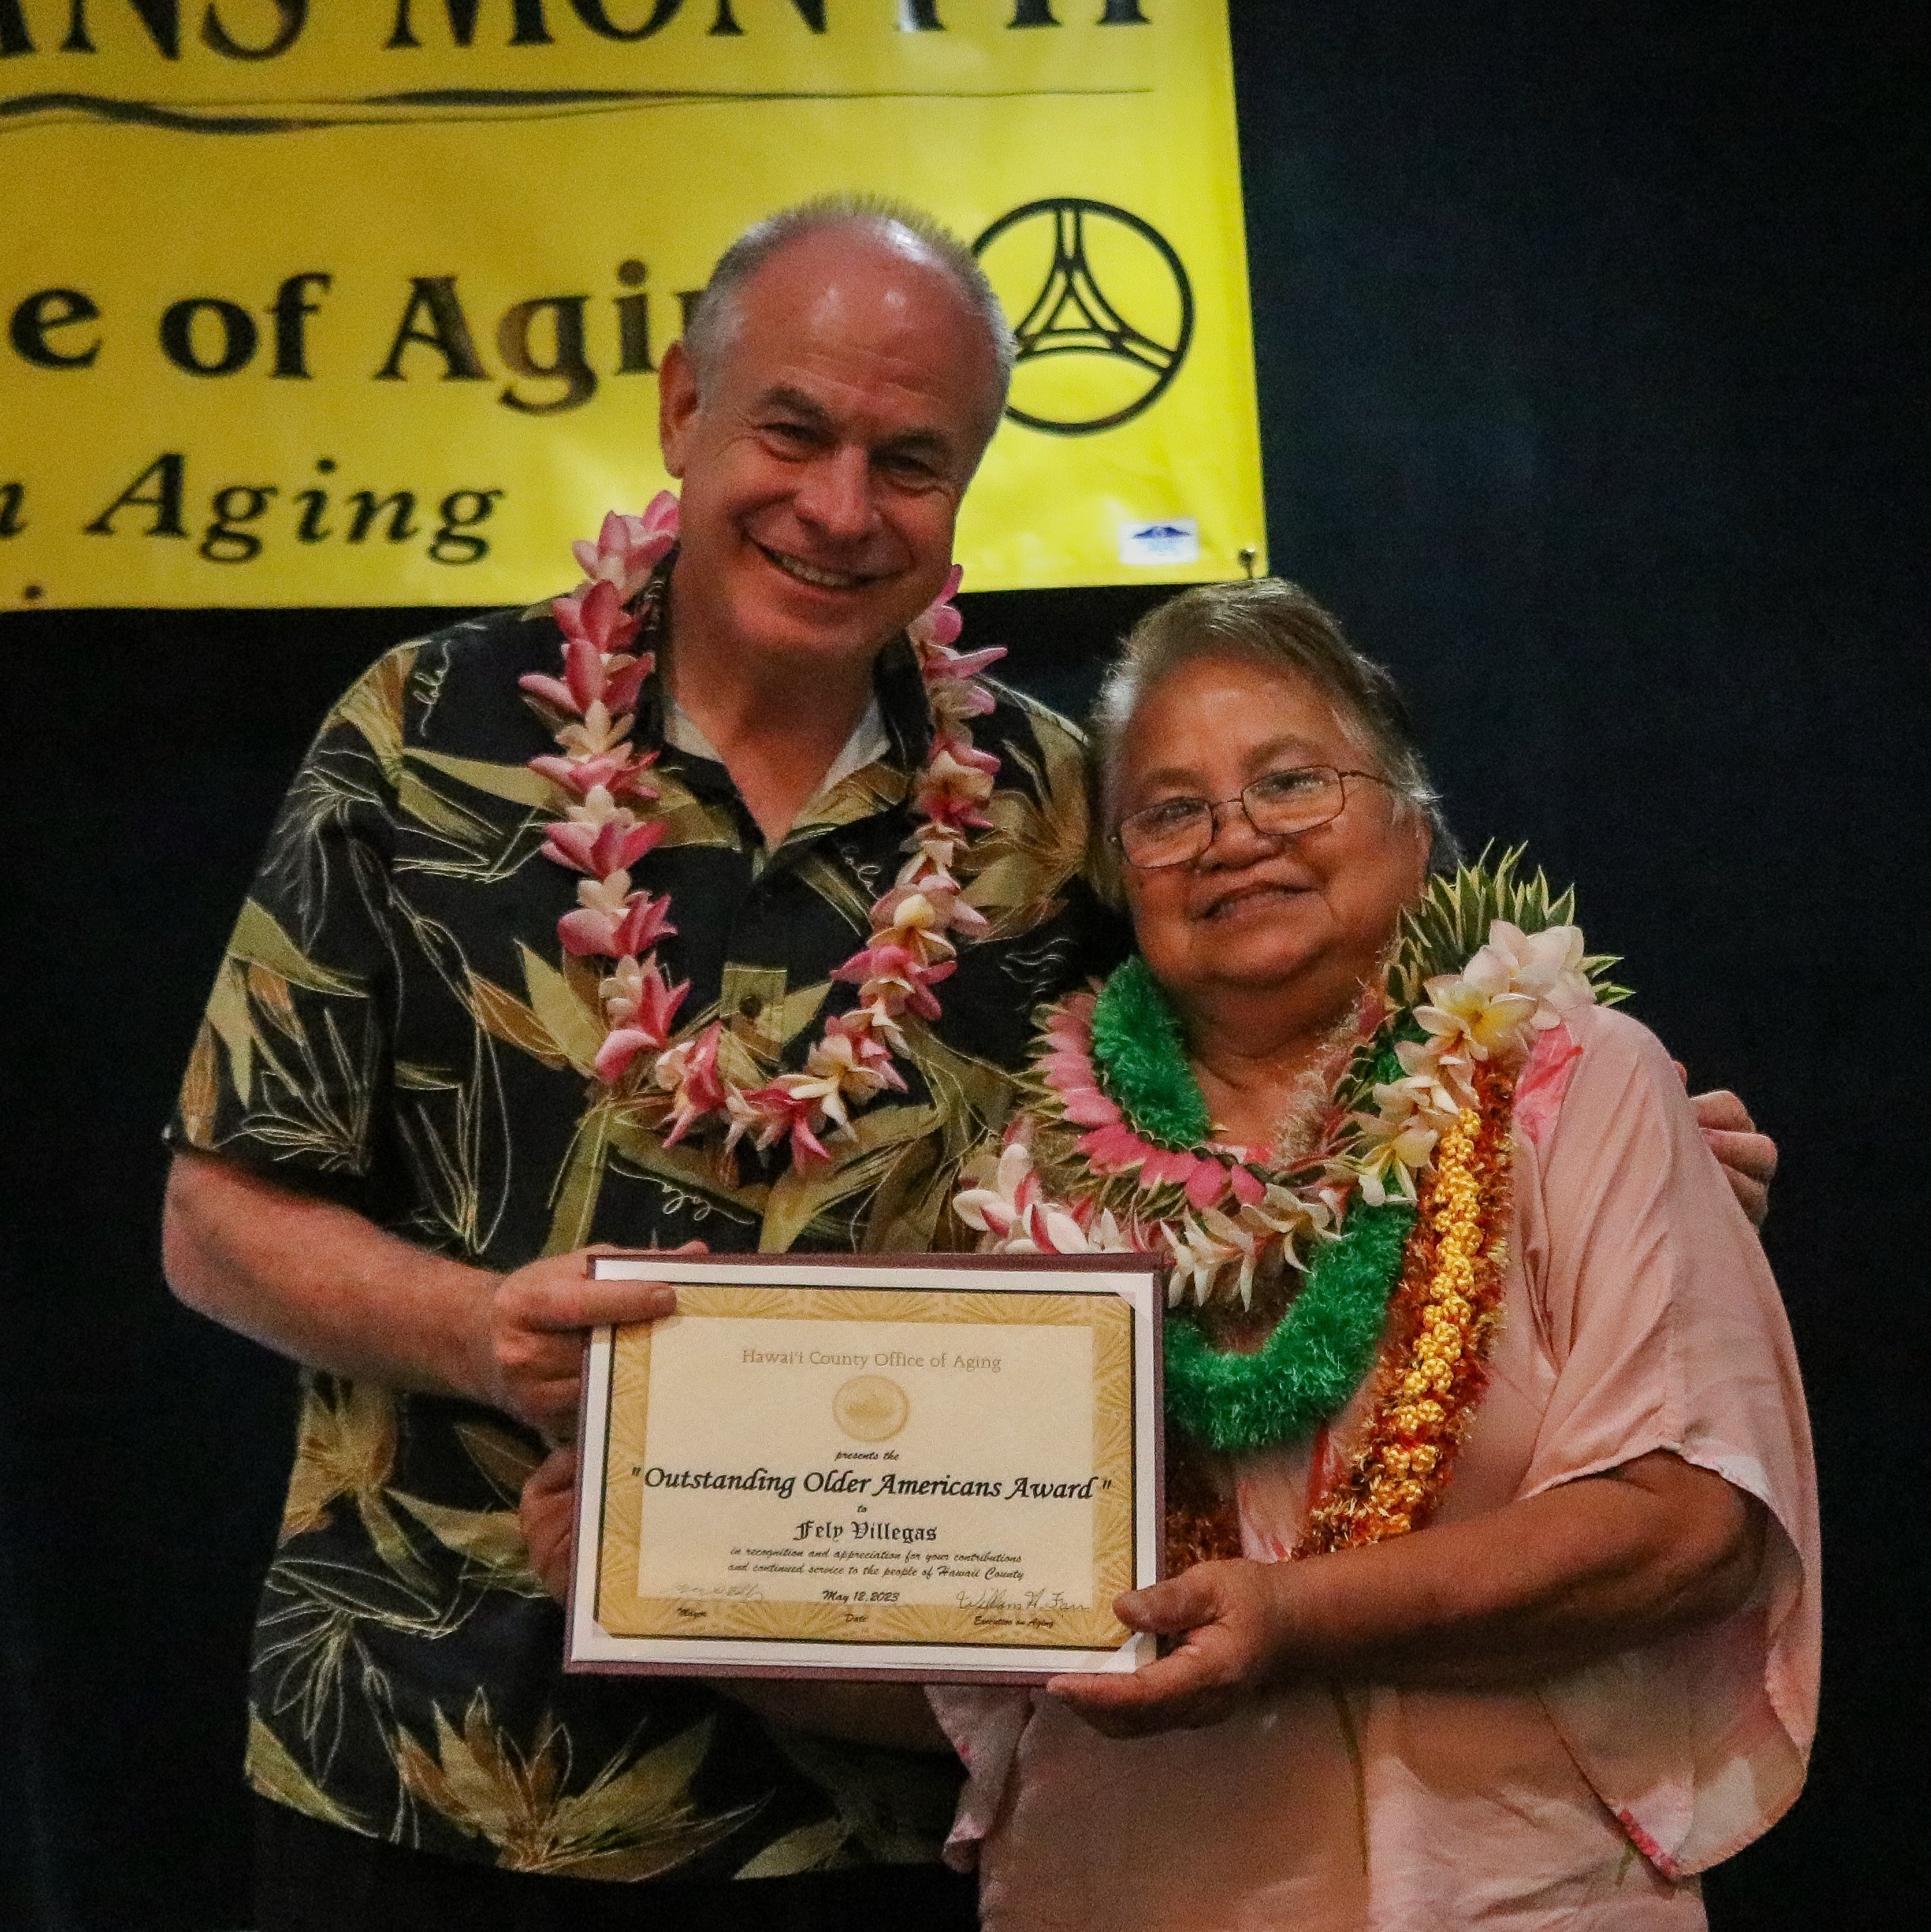 Older American Awardee Fely Villegas pictured with Hawai’i County Mayor Mitch Roth